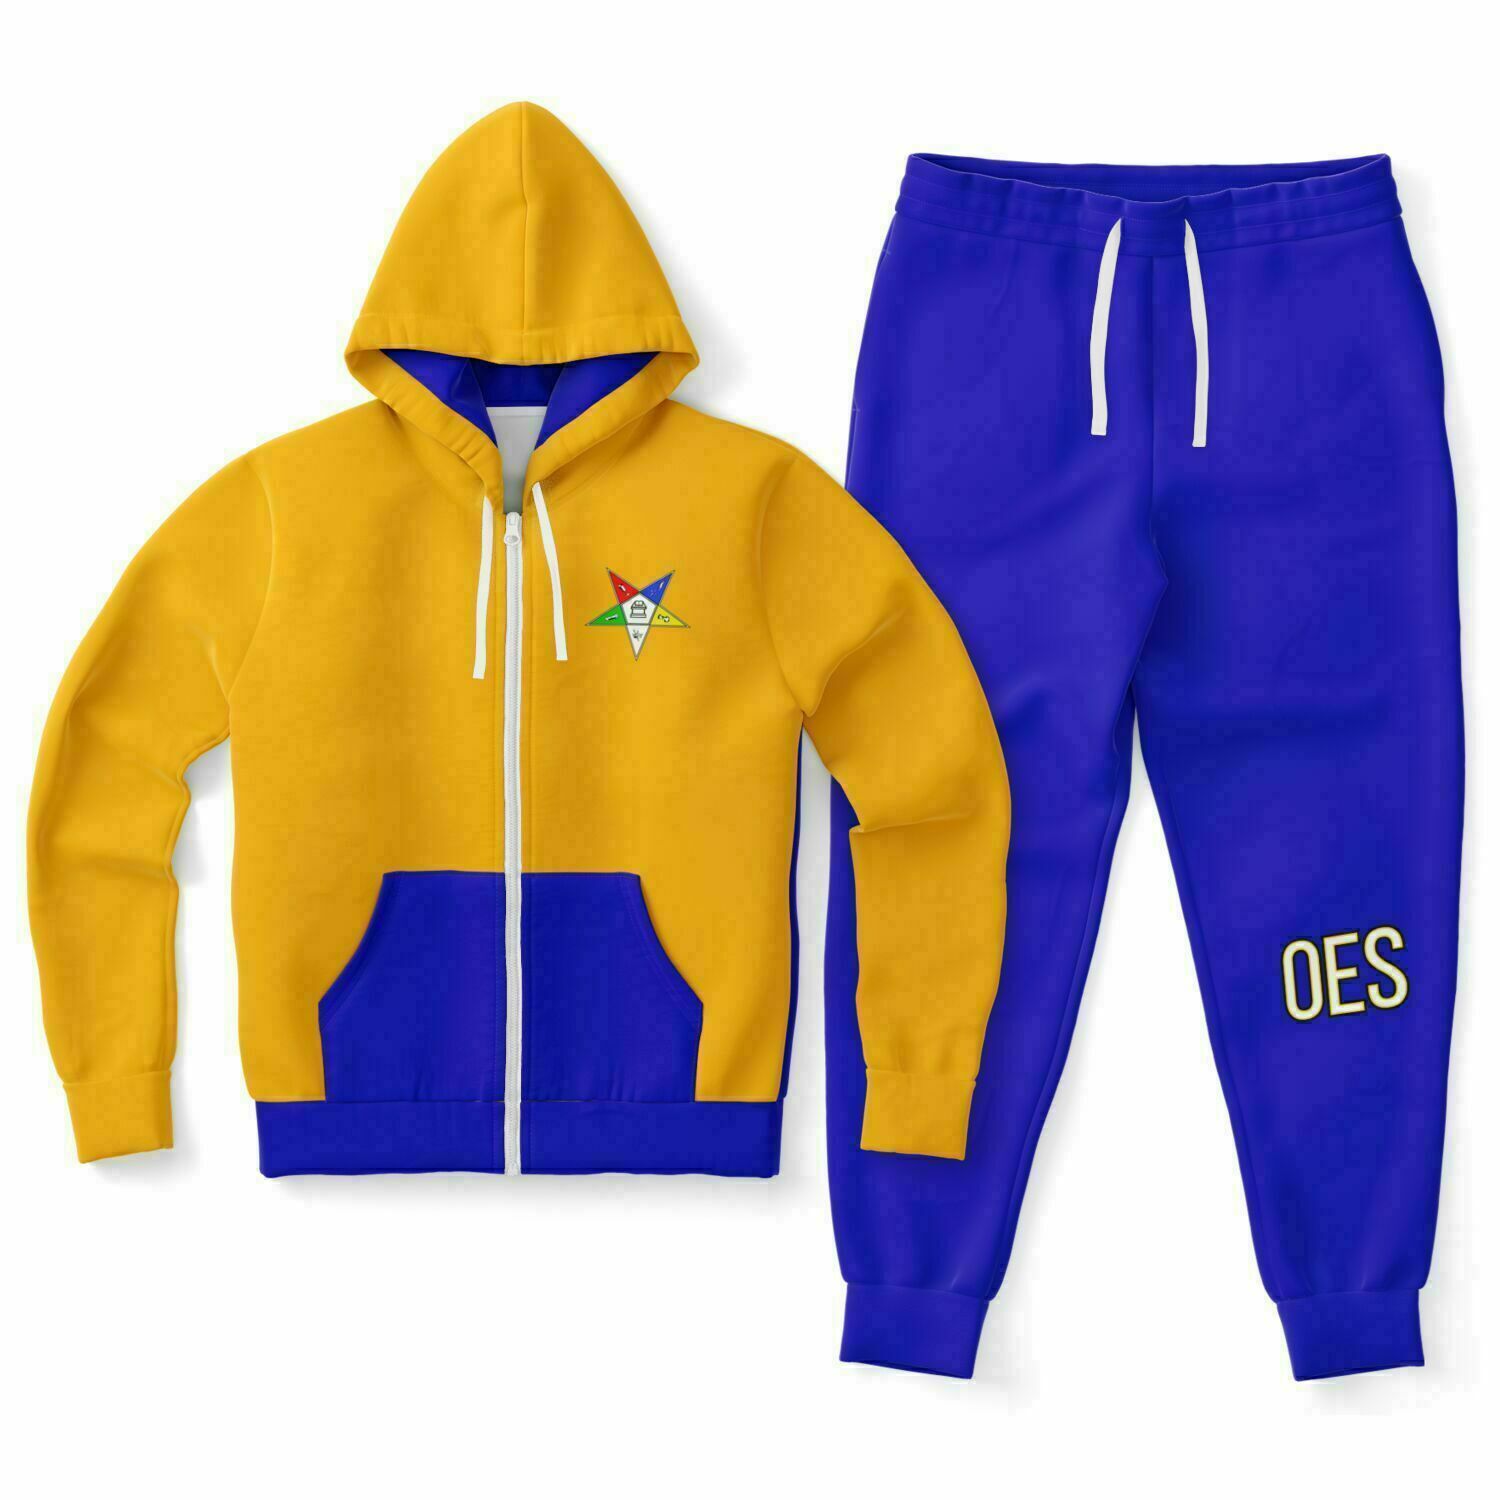 Order of the Eastern Star | OES Lovely Jogging Set